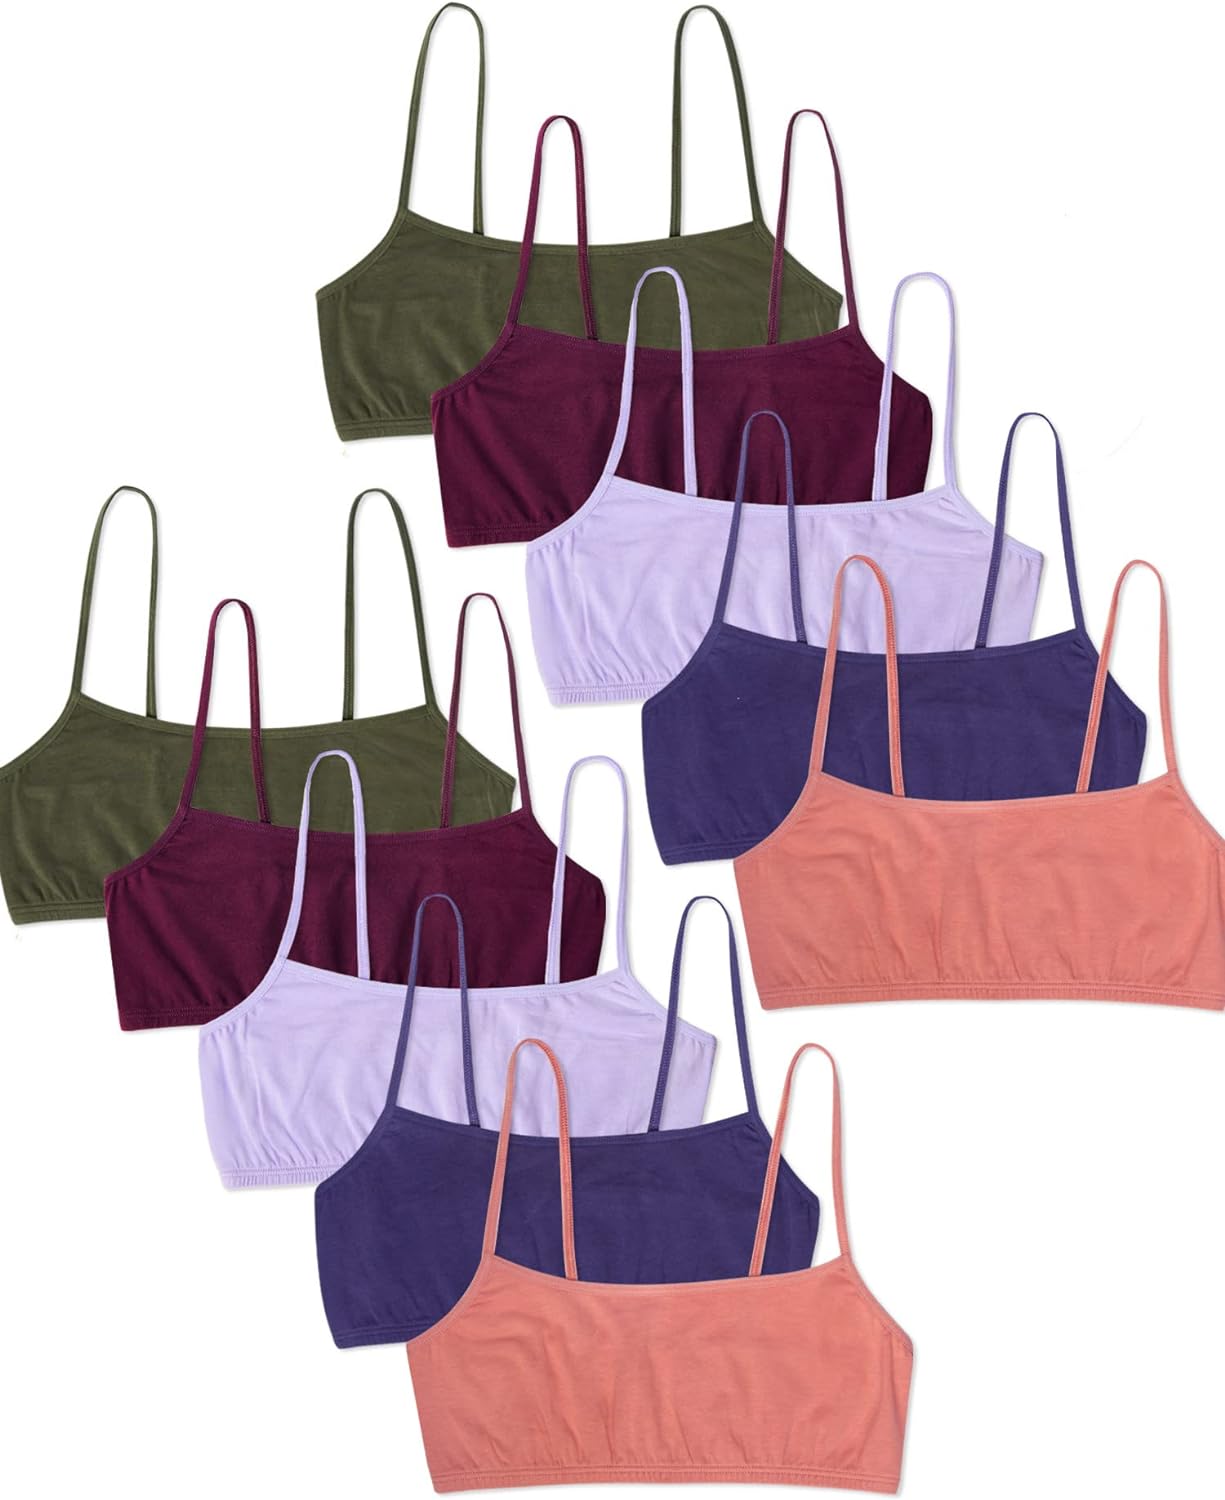 Fruit of the Loom Cotton 42 Band Bras & Bra Sets for Women